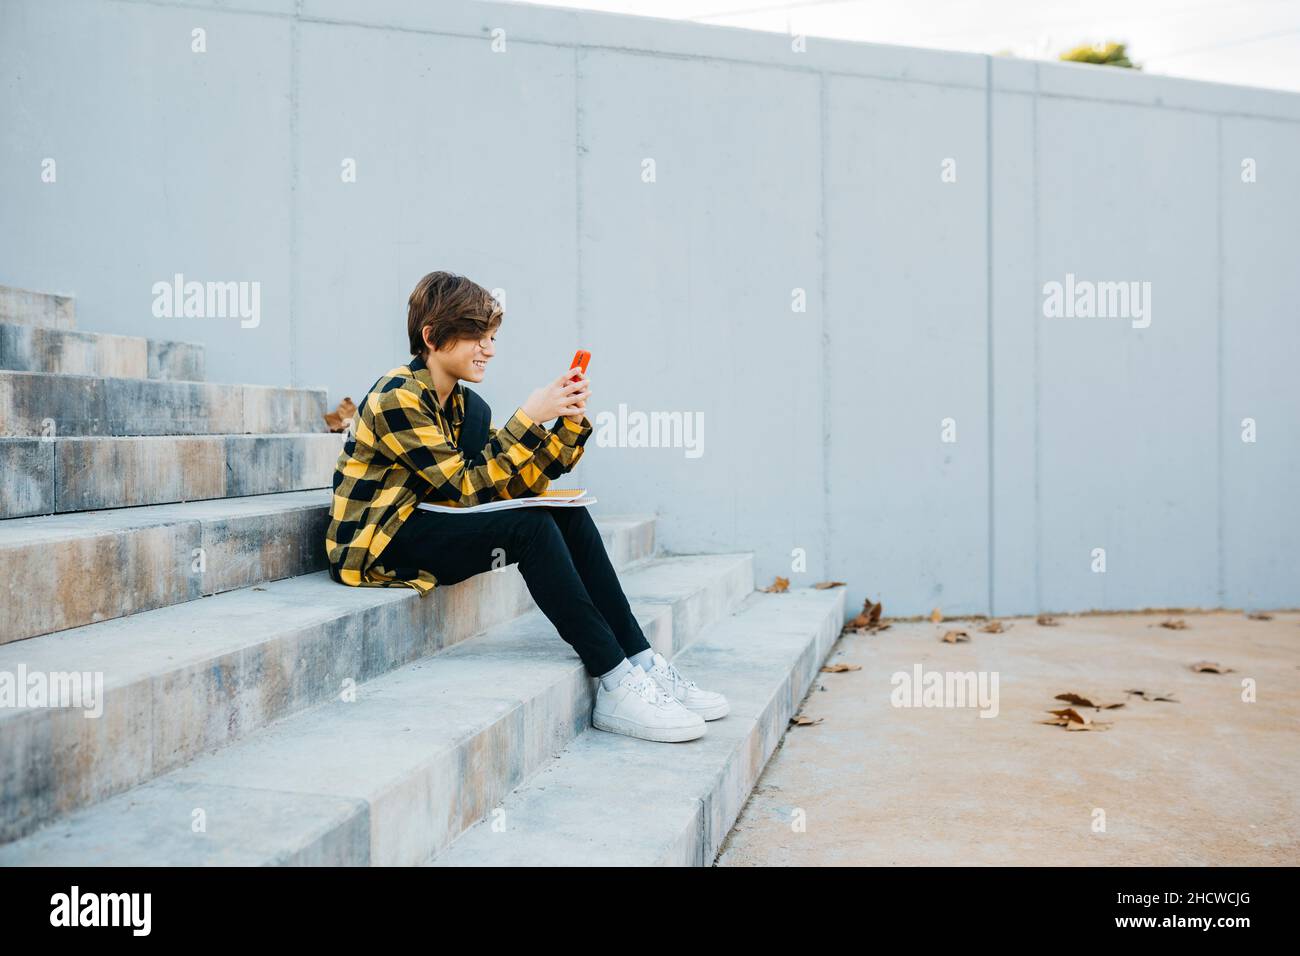 Teen student using a red smartphone and sitting on stairs outdoors Stock Photo